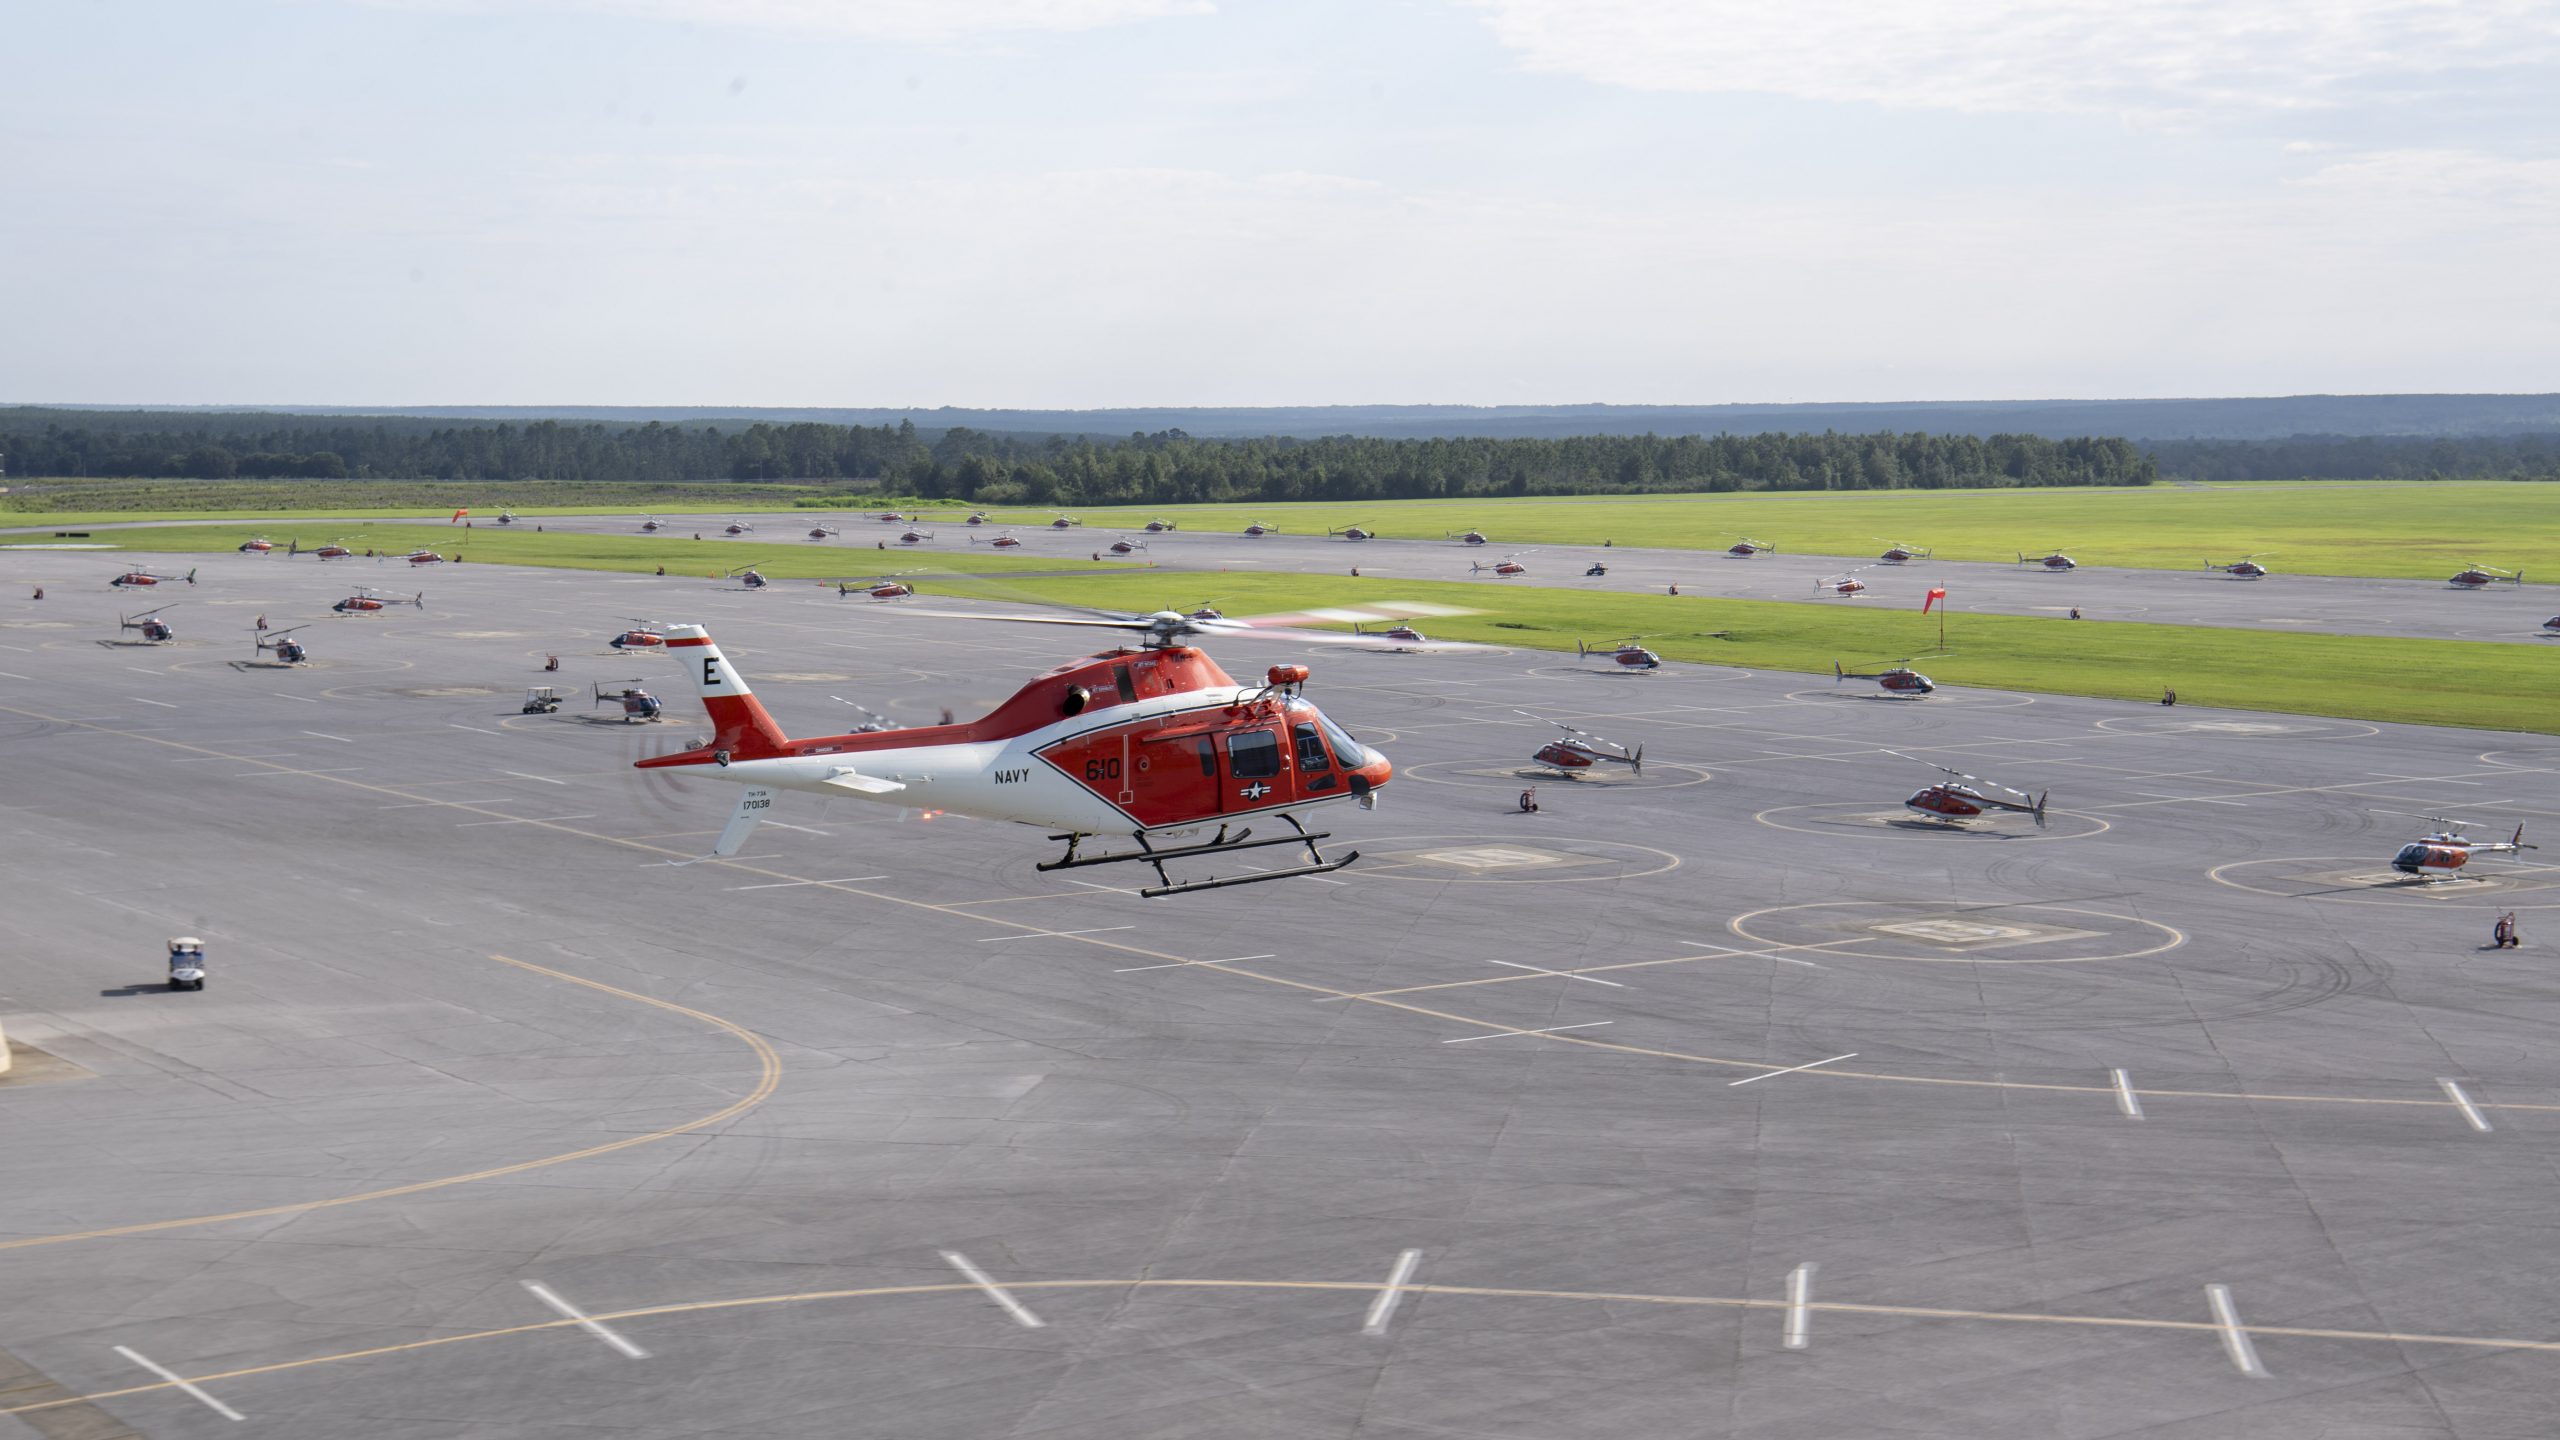 The Navy’s first TH-73A Thrasher arrives at Naval Air Station Whiting Field in Milton Aug. 6, 2021. The TH-73A will be assigned to Training Air Wing 5 on base and will replace the TH-57B/C Sea Ranger as the undergraduate rotary and tilt-rotor helicopter trainer for the Navy, Marine Corps, and Coast Guard.